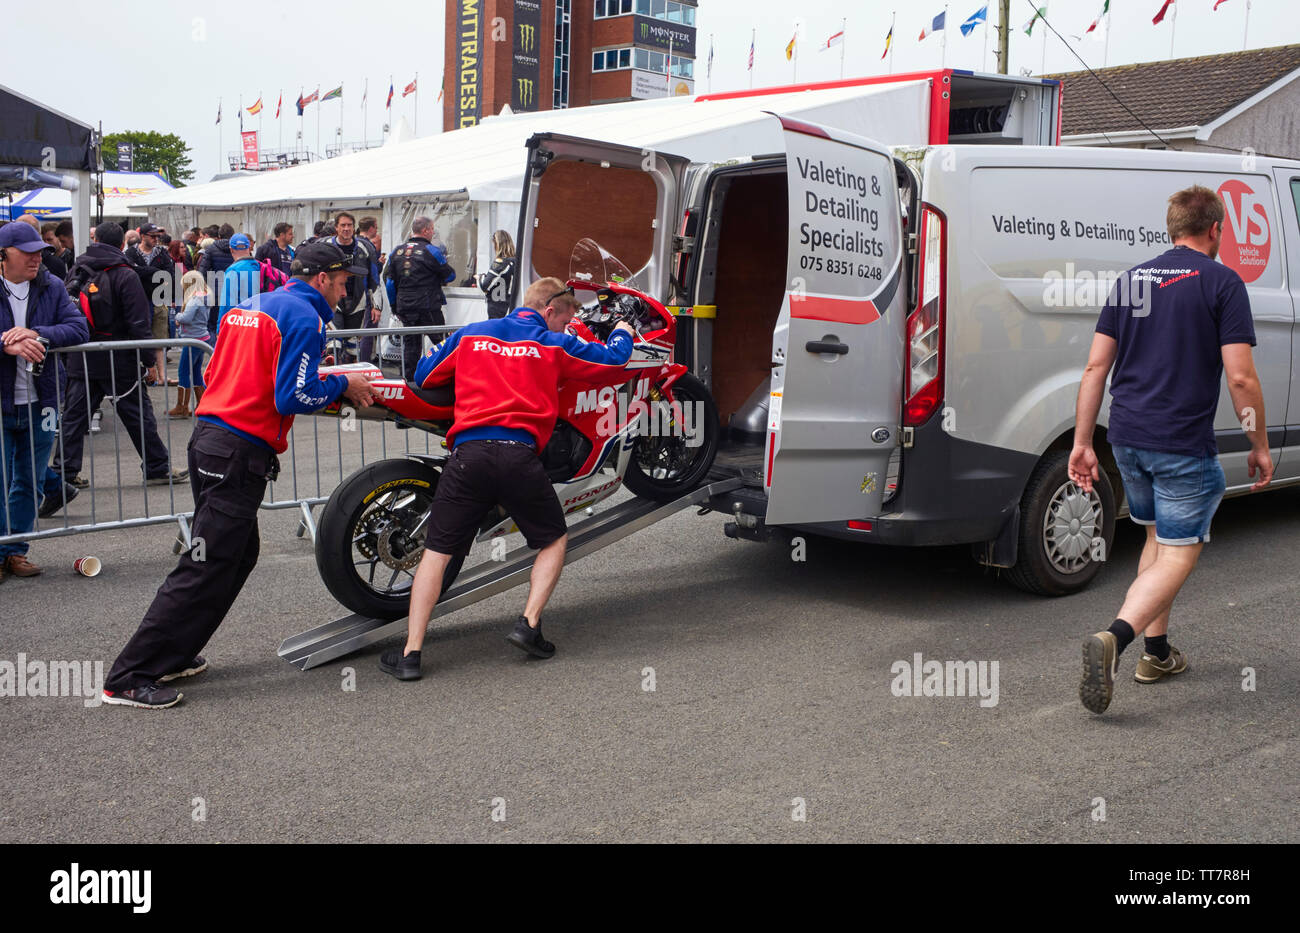 Members of the Honda team load a bike into the back of a van after the Senior TT race in 2019 Stock Photo